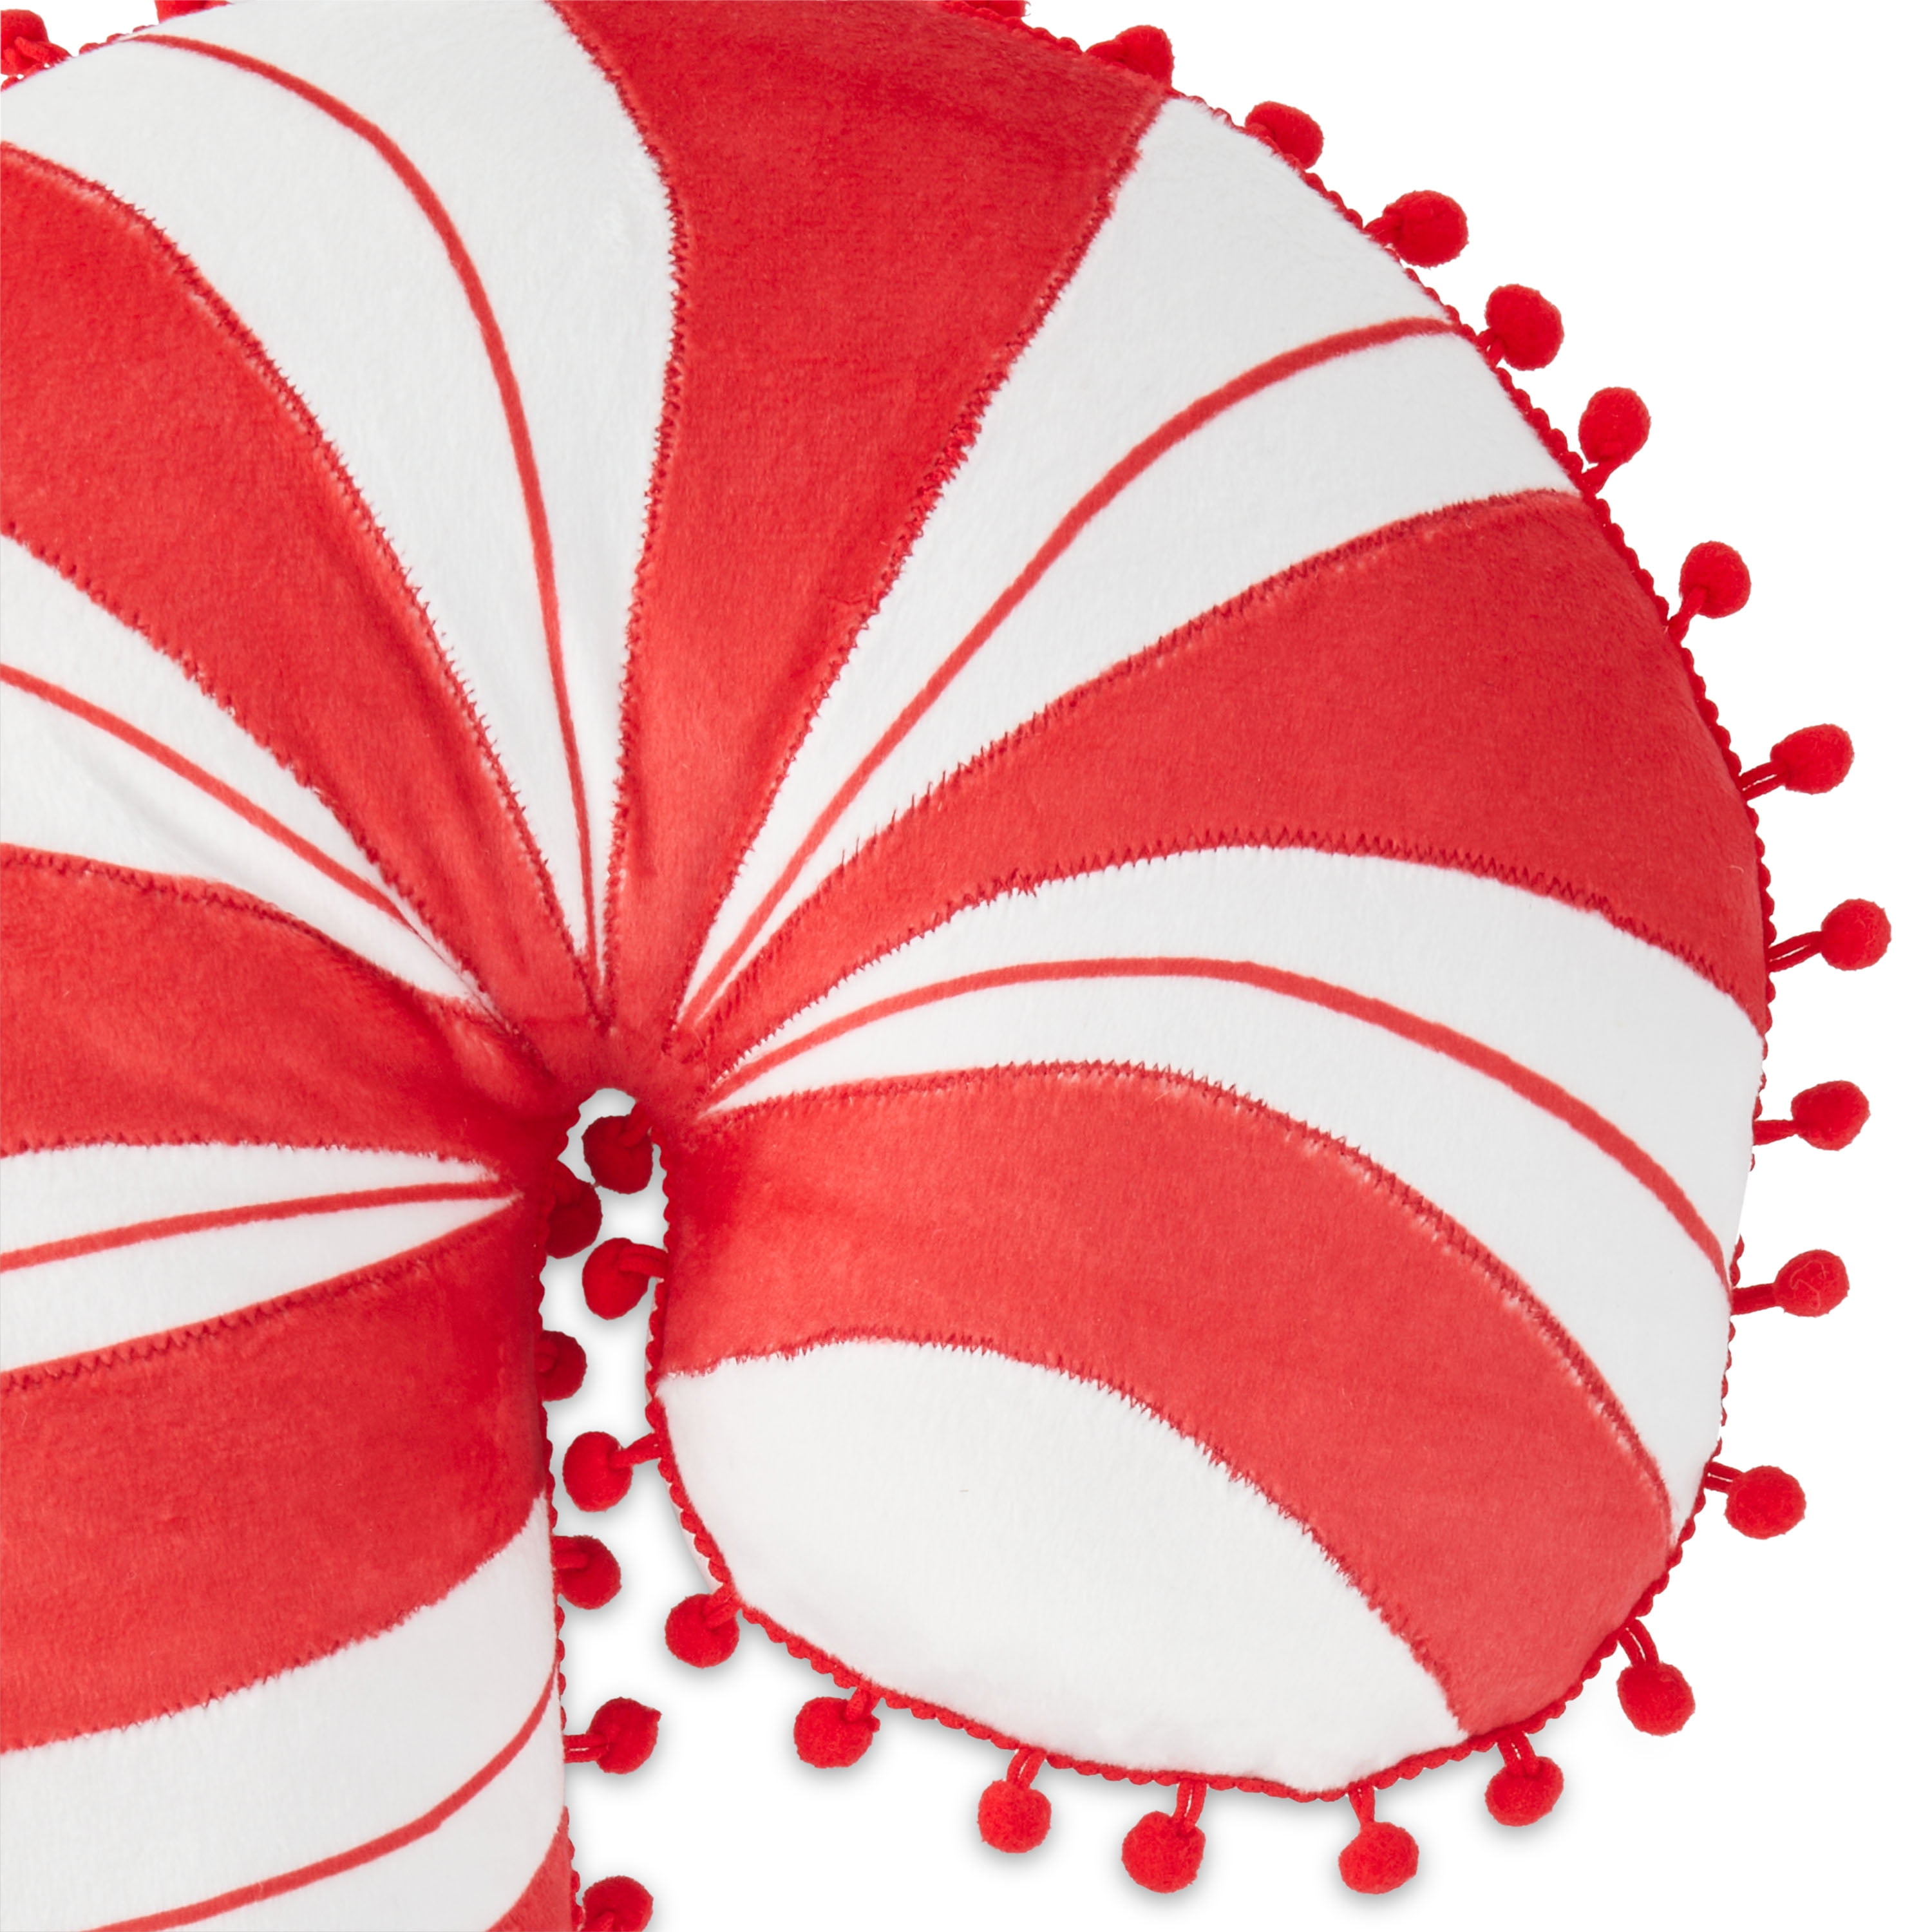 Holiday Time Red & White Peppermint Candy Shaped Christmas